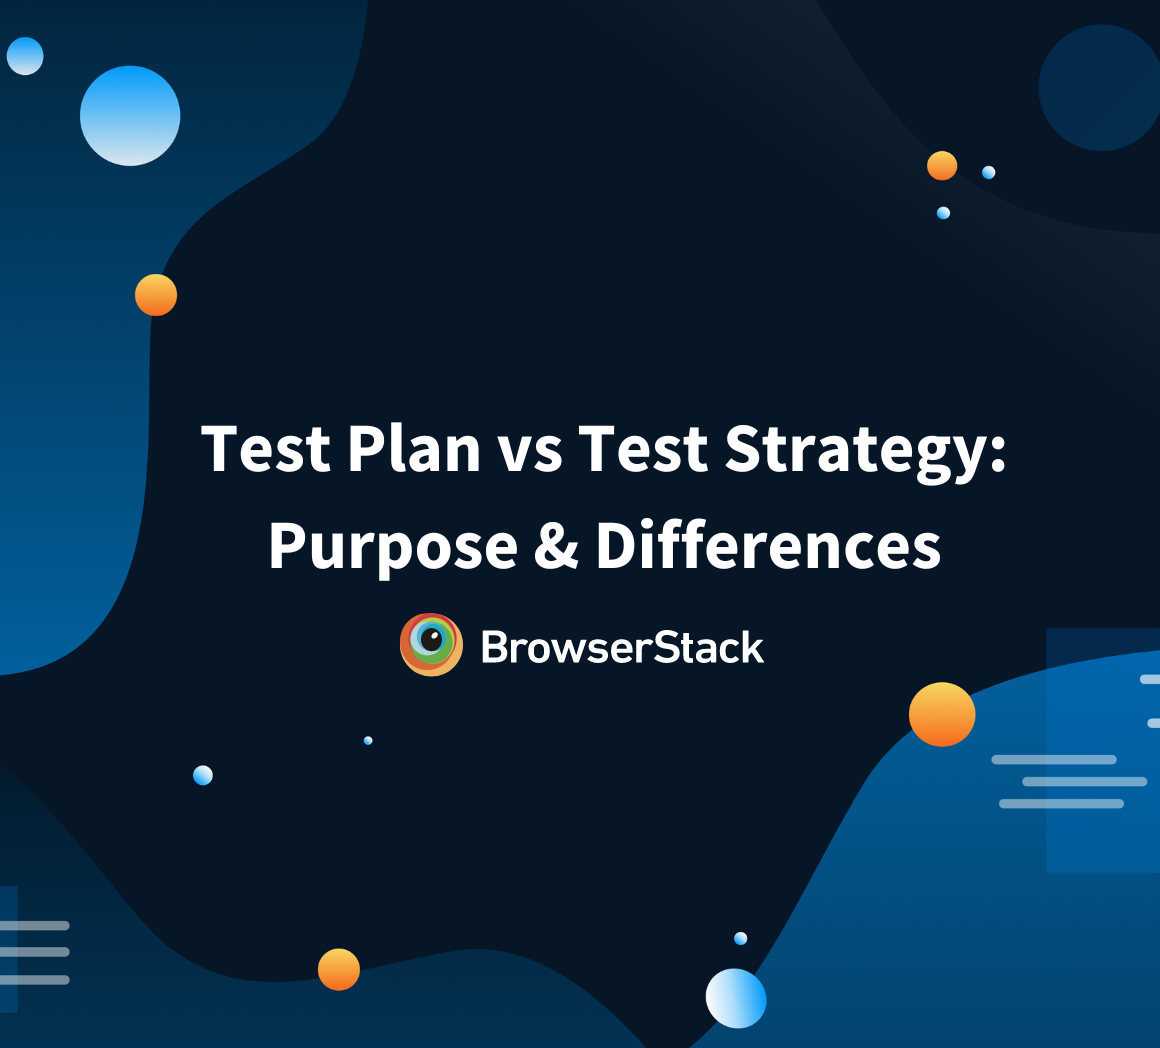 Test Plan vs Test Strategy Purpose & Differences